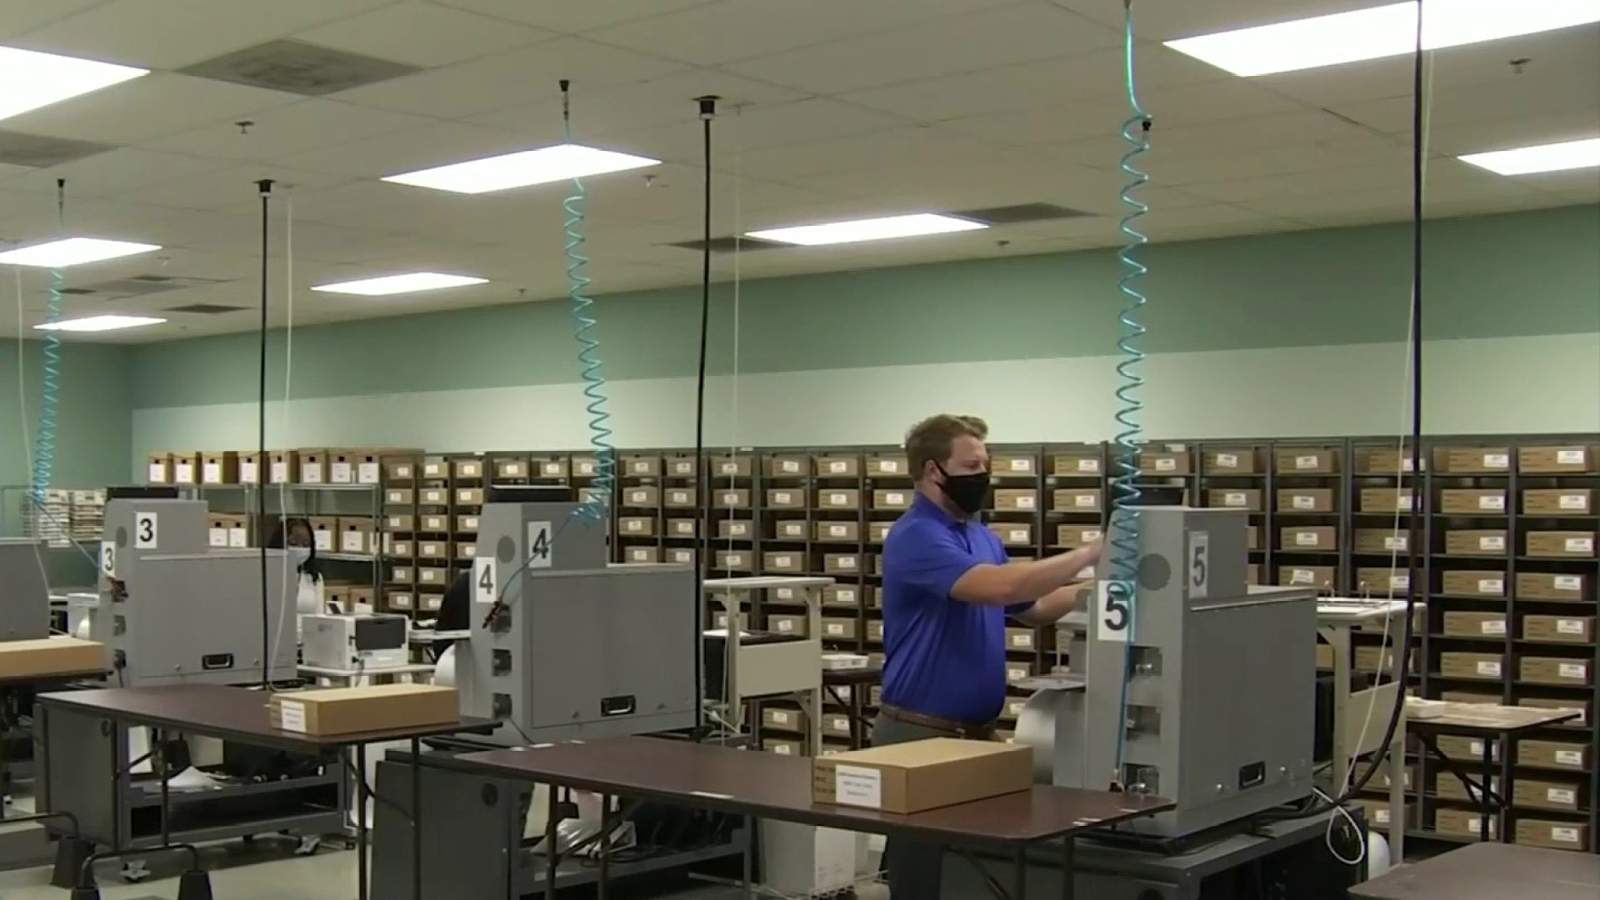 Orange County publicly tests election equipment before processing ballots